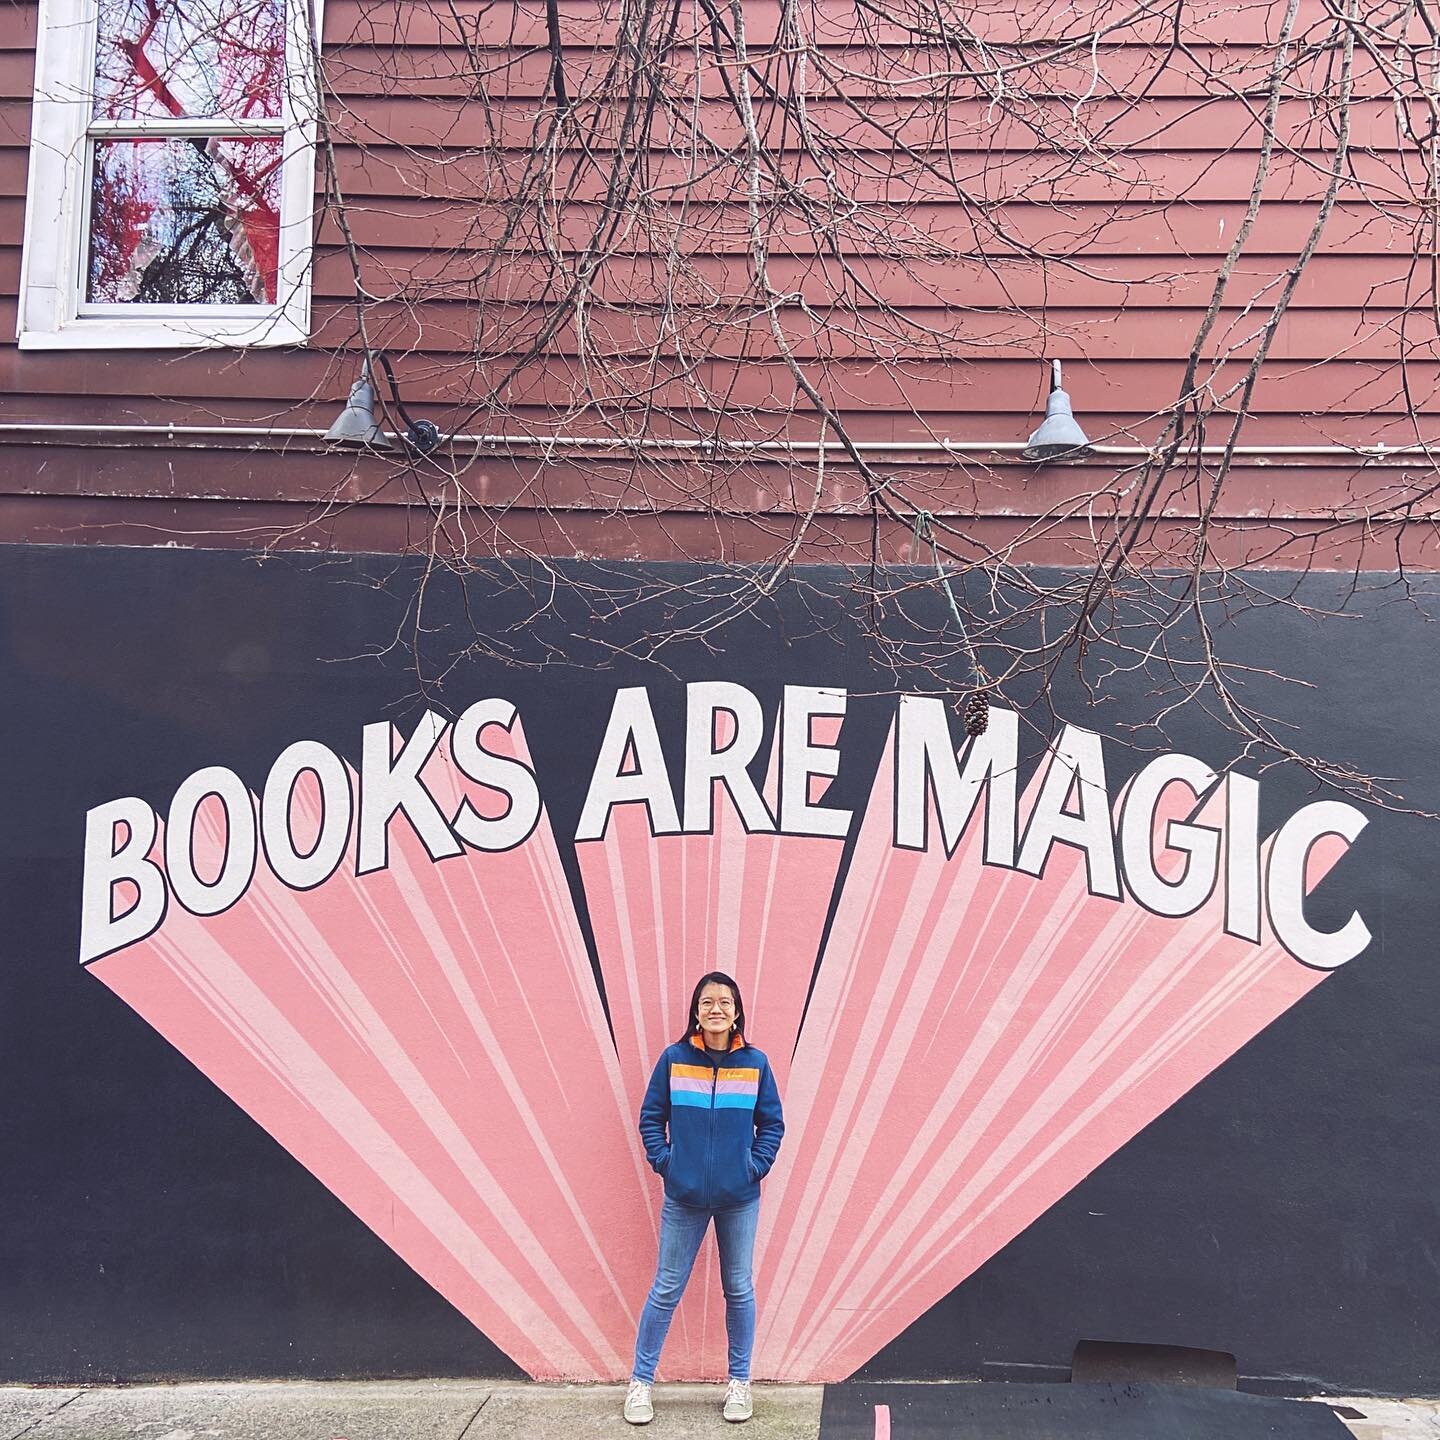 After my school visit this morning, I made my way up the street to visit this magical bookstore. ✨